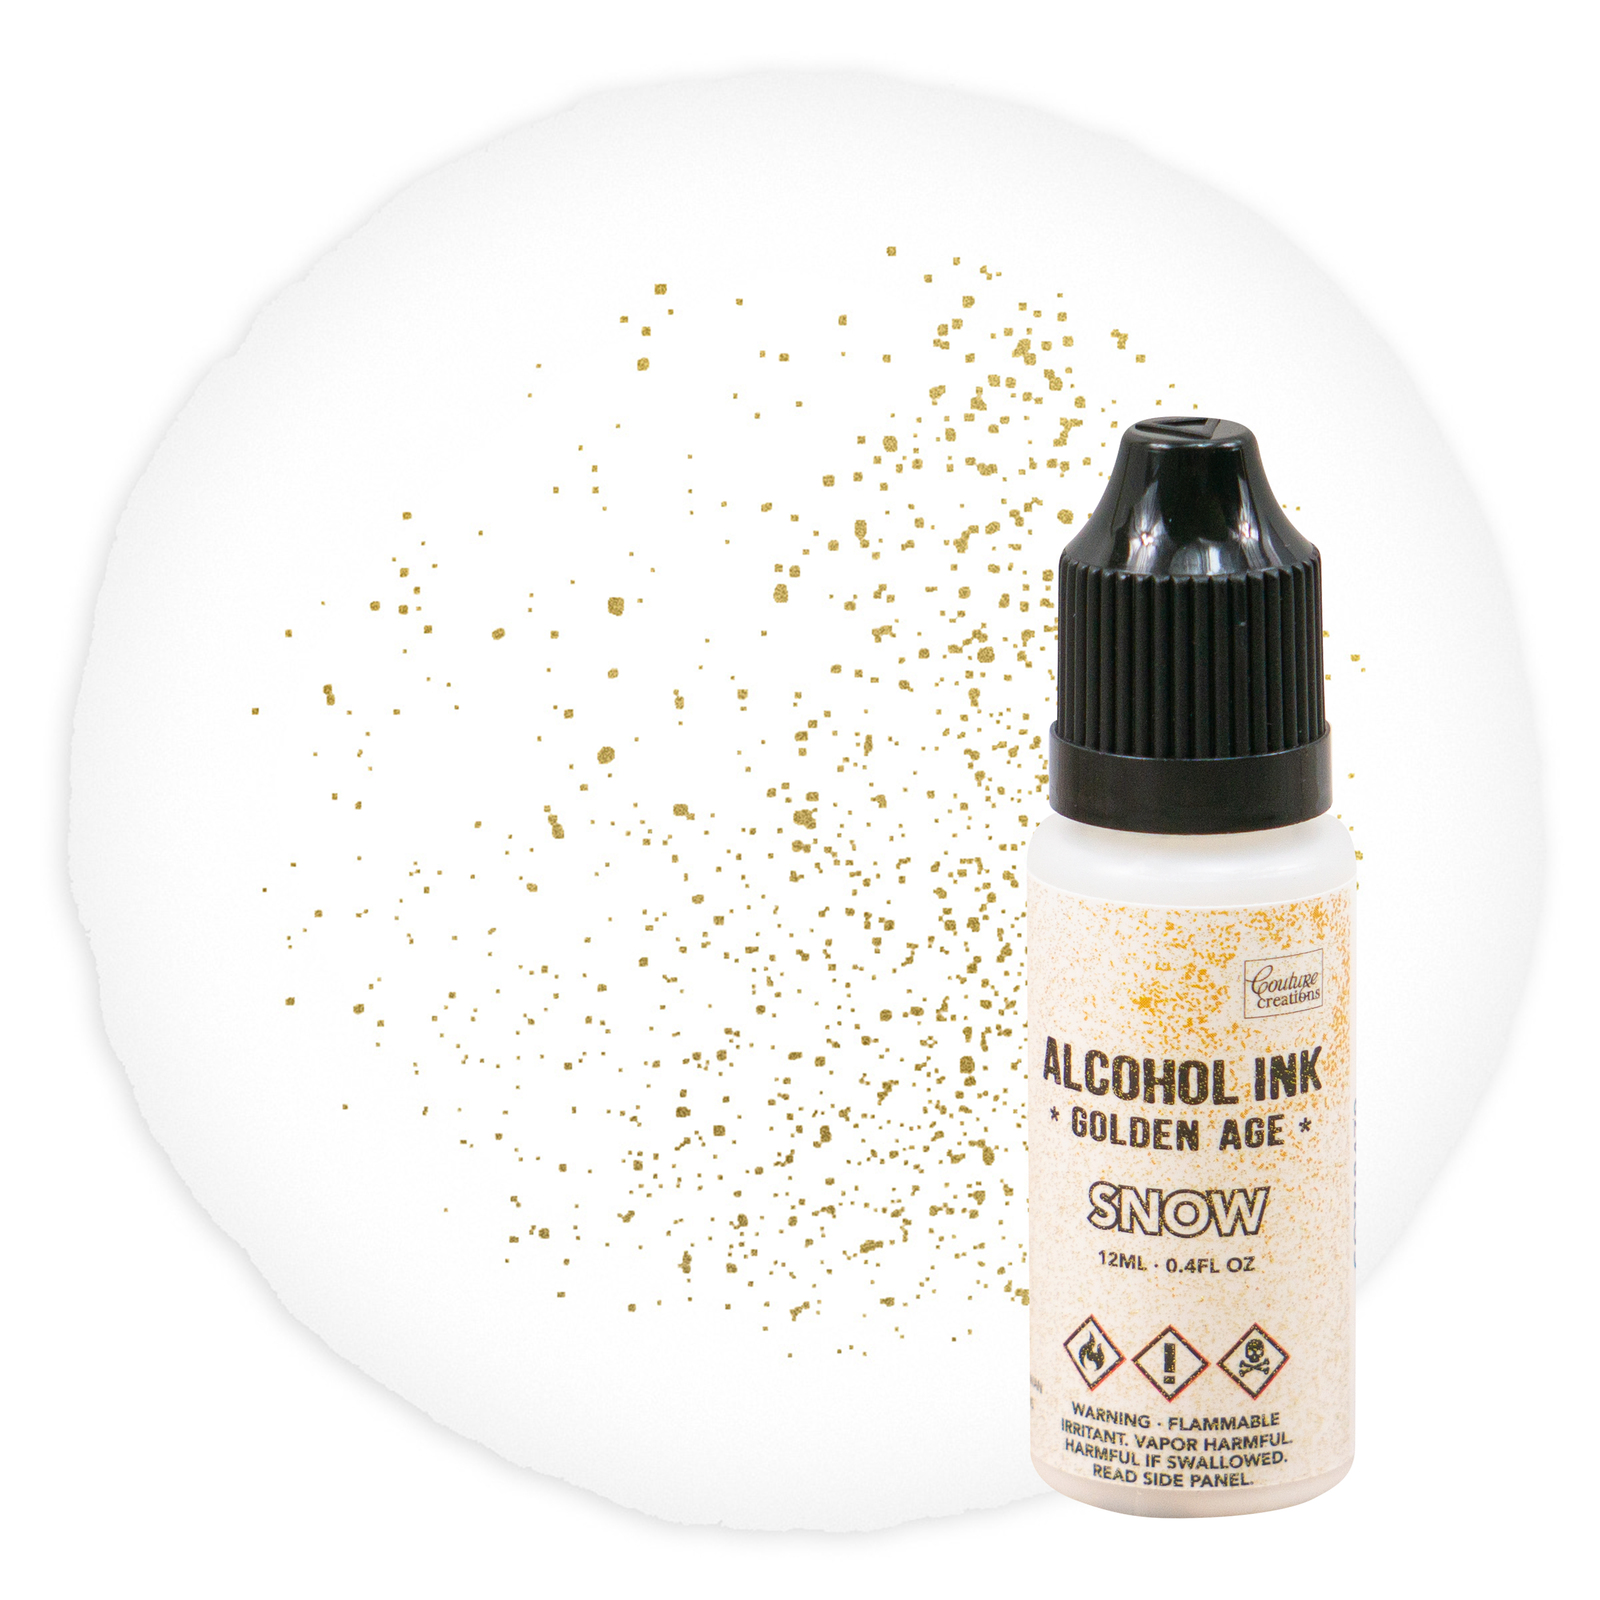 Couture Creations Alcohol Ink Golden Age Snow 12ml